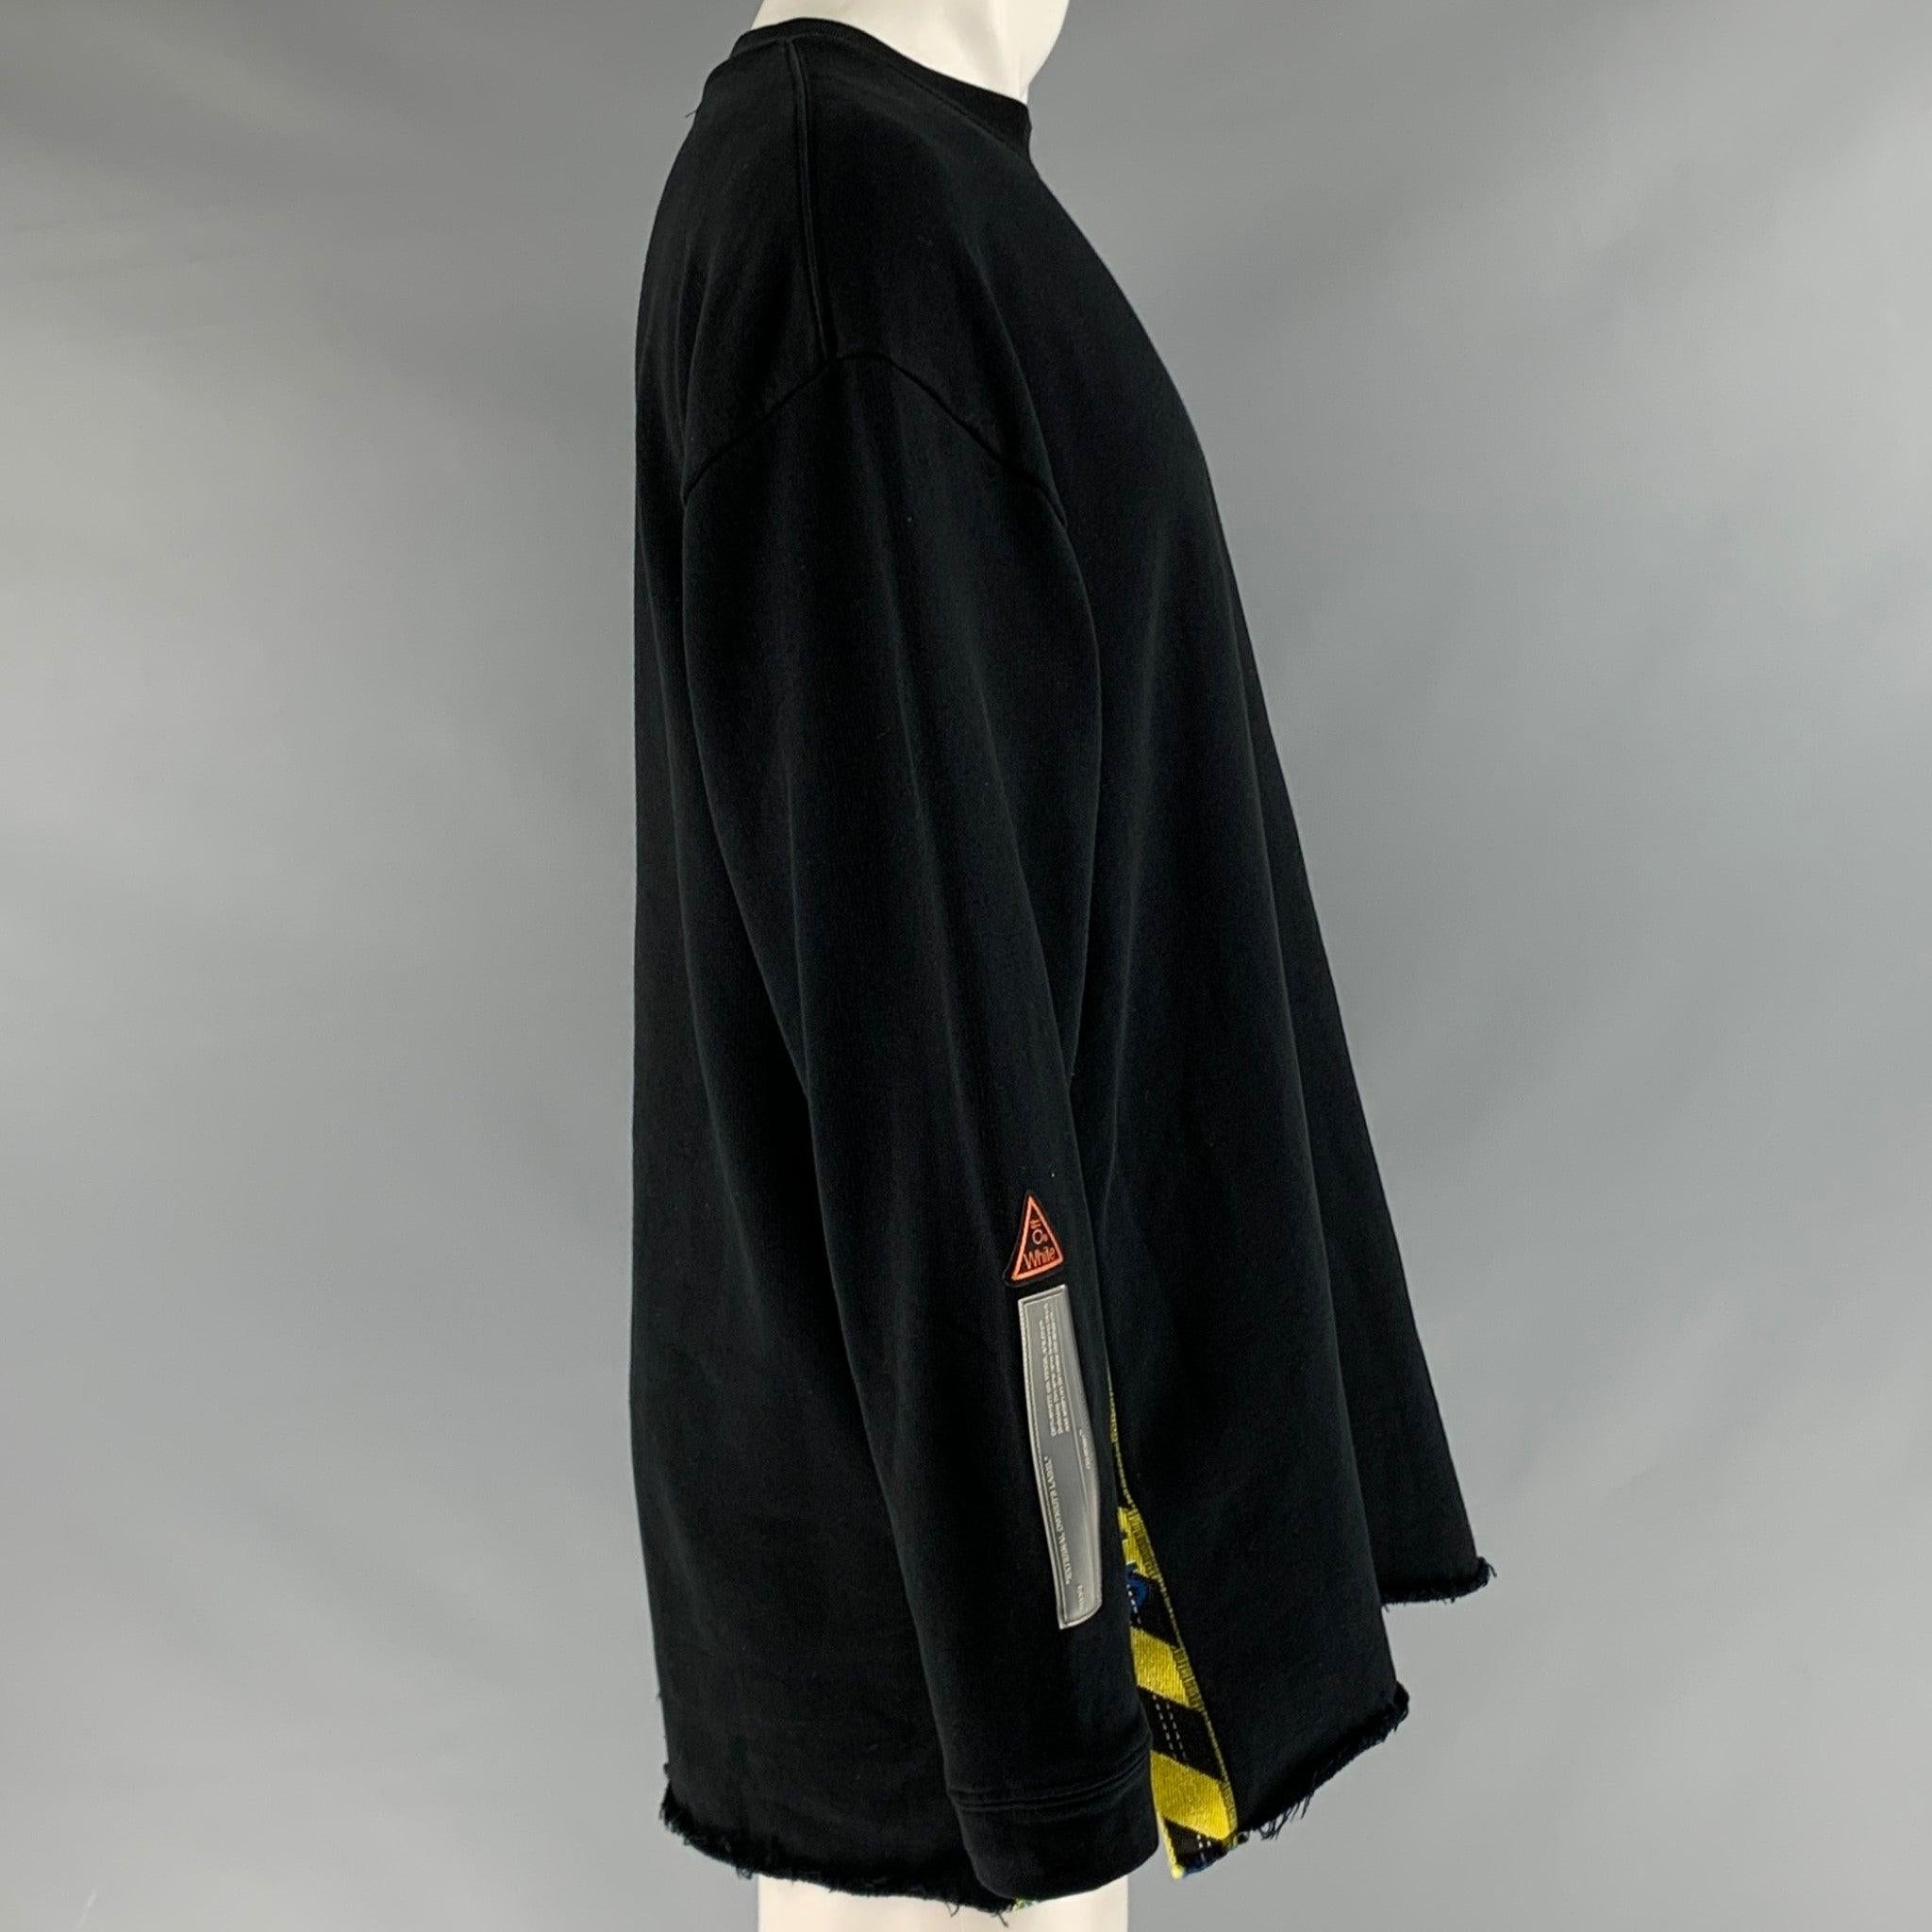 OFF-WHITE sweatshirt
in a
black cotton fabric featuring yellow ribbon side details, raw edge hem, right sleeve appliques, and a crew neck. Made in Portugal.Excellent Pre-Owned Condition. 

Marked:   S 

Measurements: 
 
Shoulder: 24.5 inches Chest: